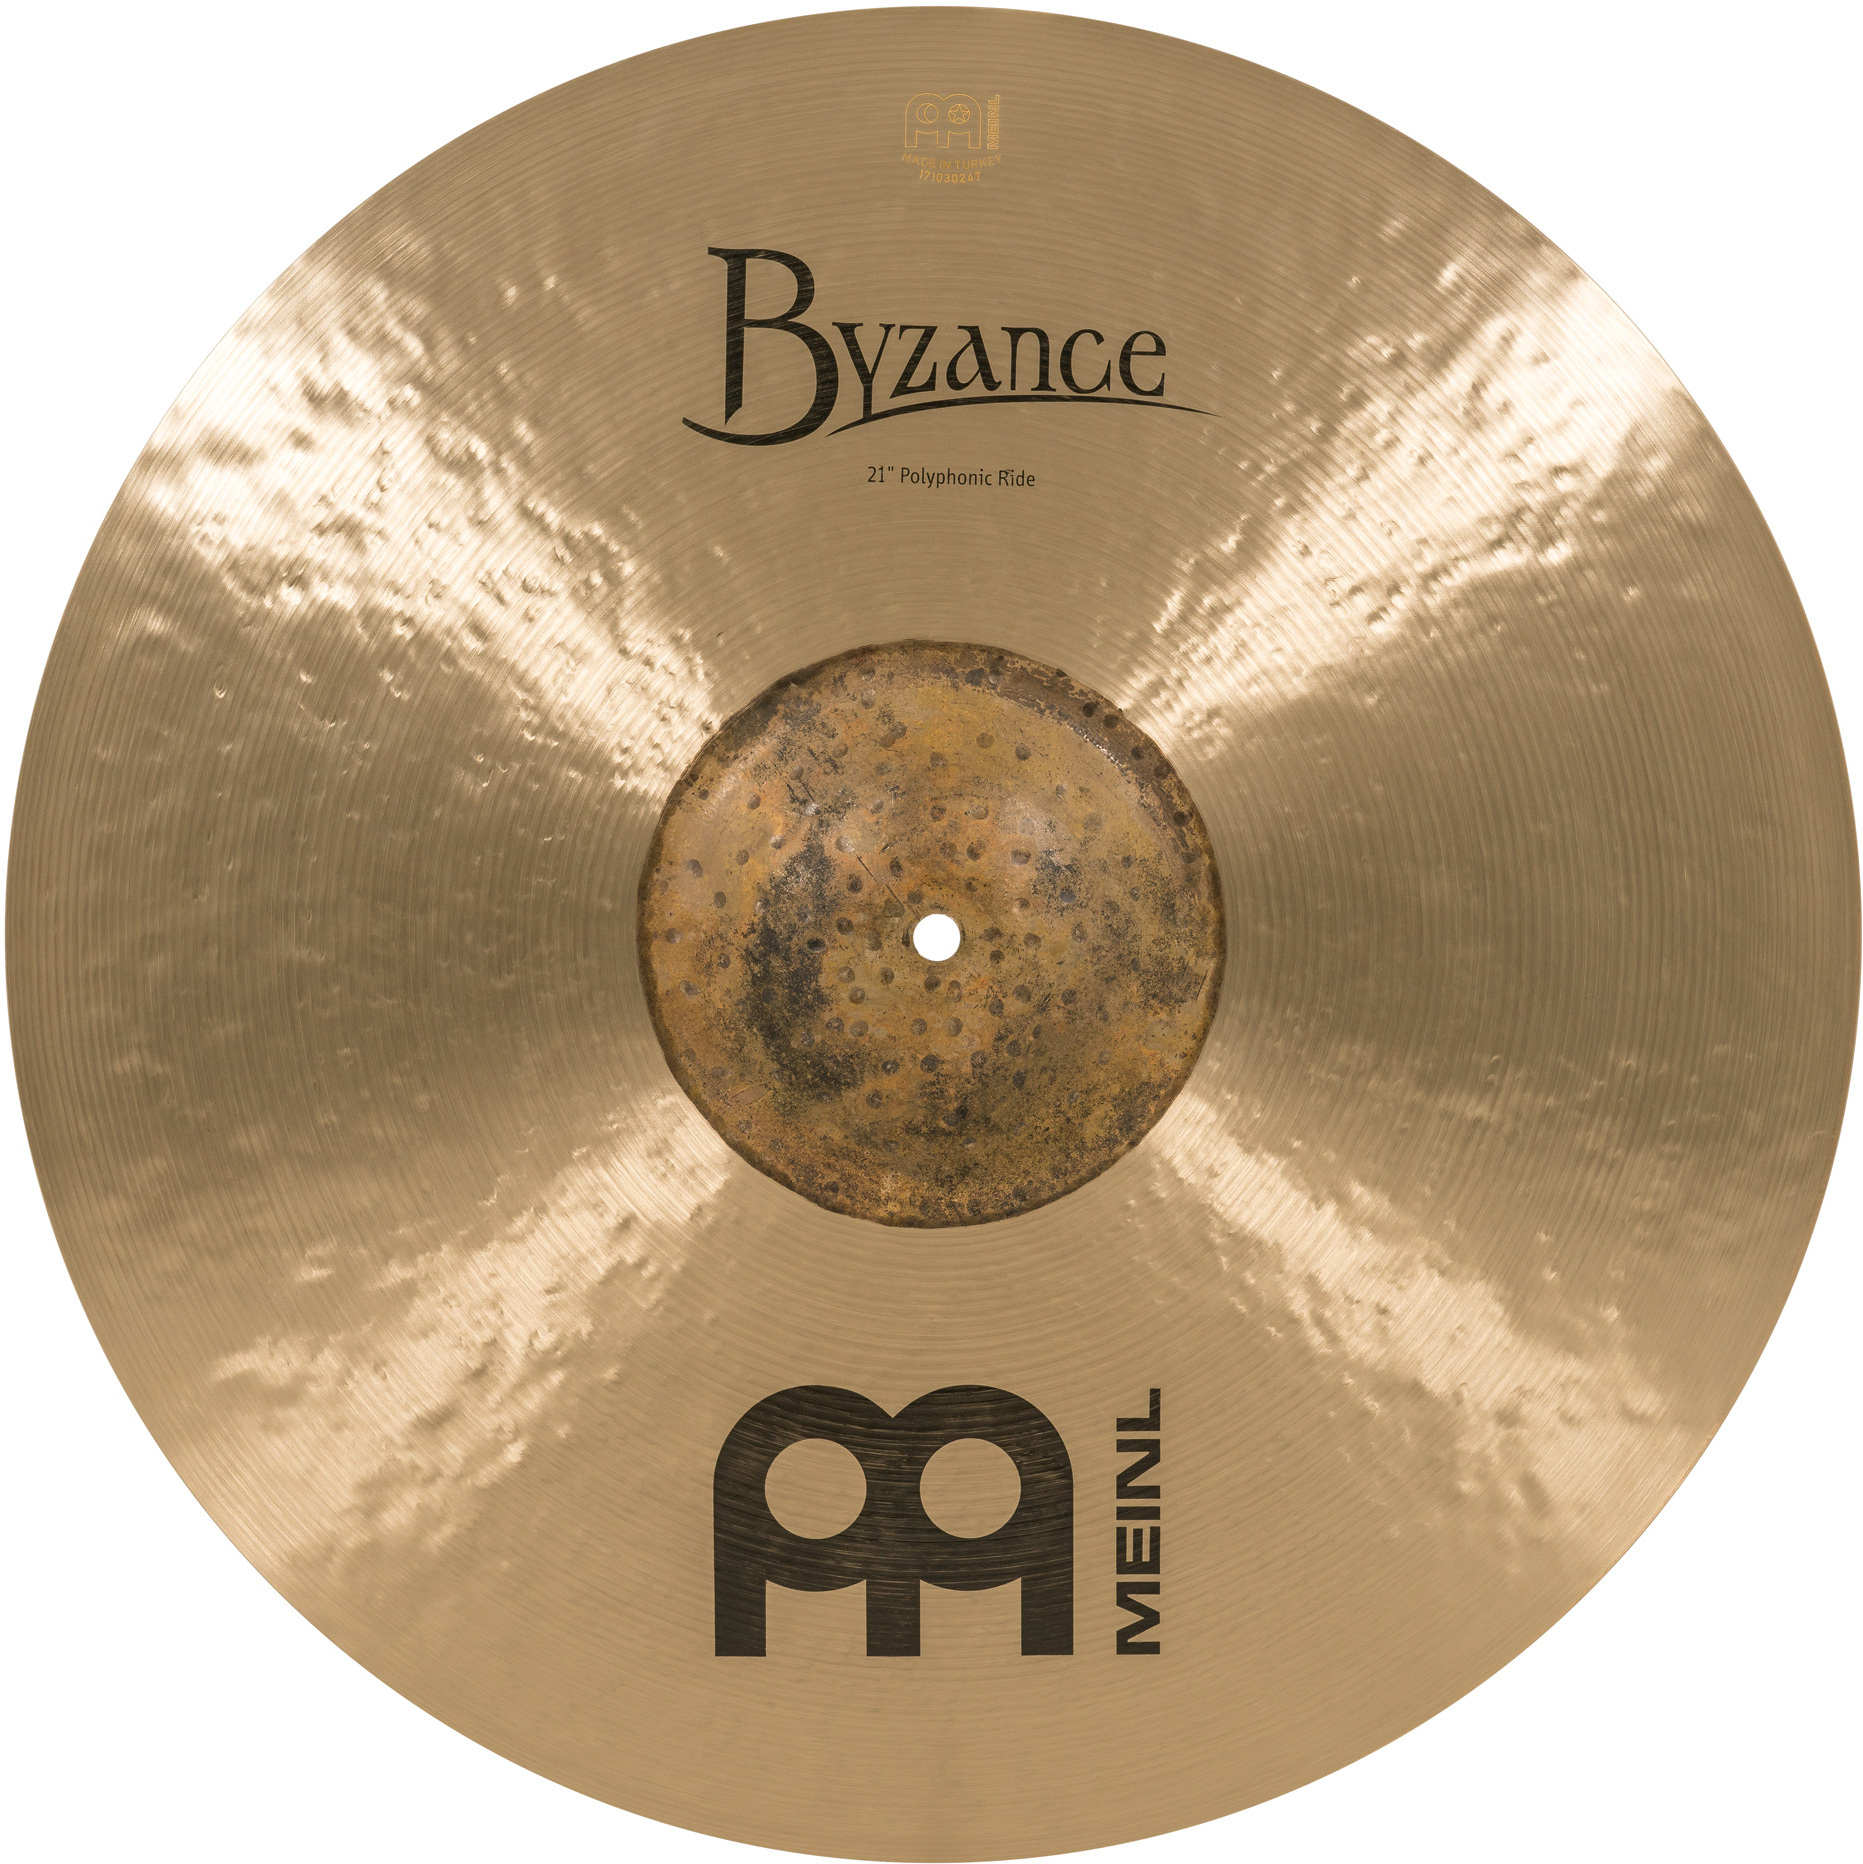 Meinl Byzance Polyphonic Ride - Ride cymbal - Main picture